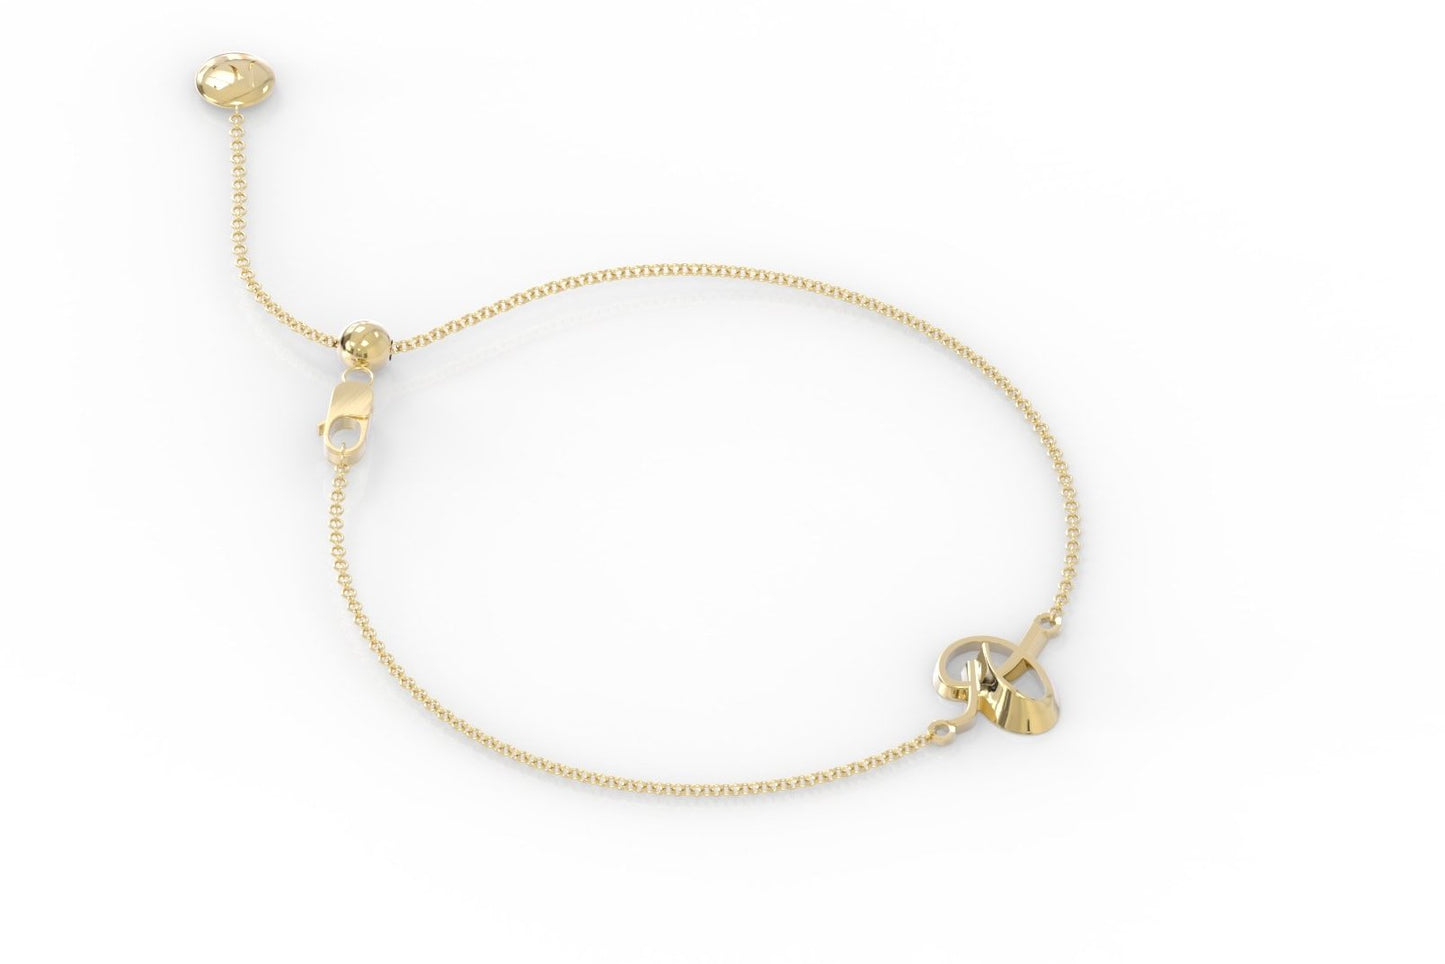 The Love Collect - "O" Bracelet